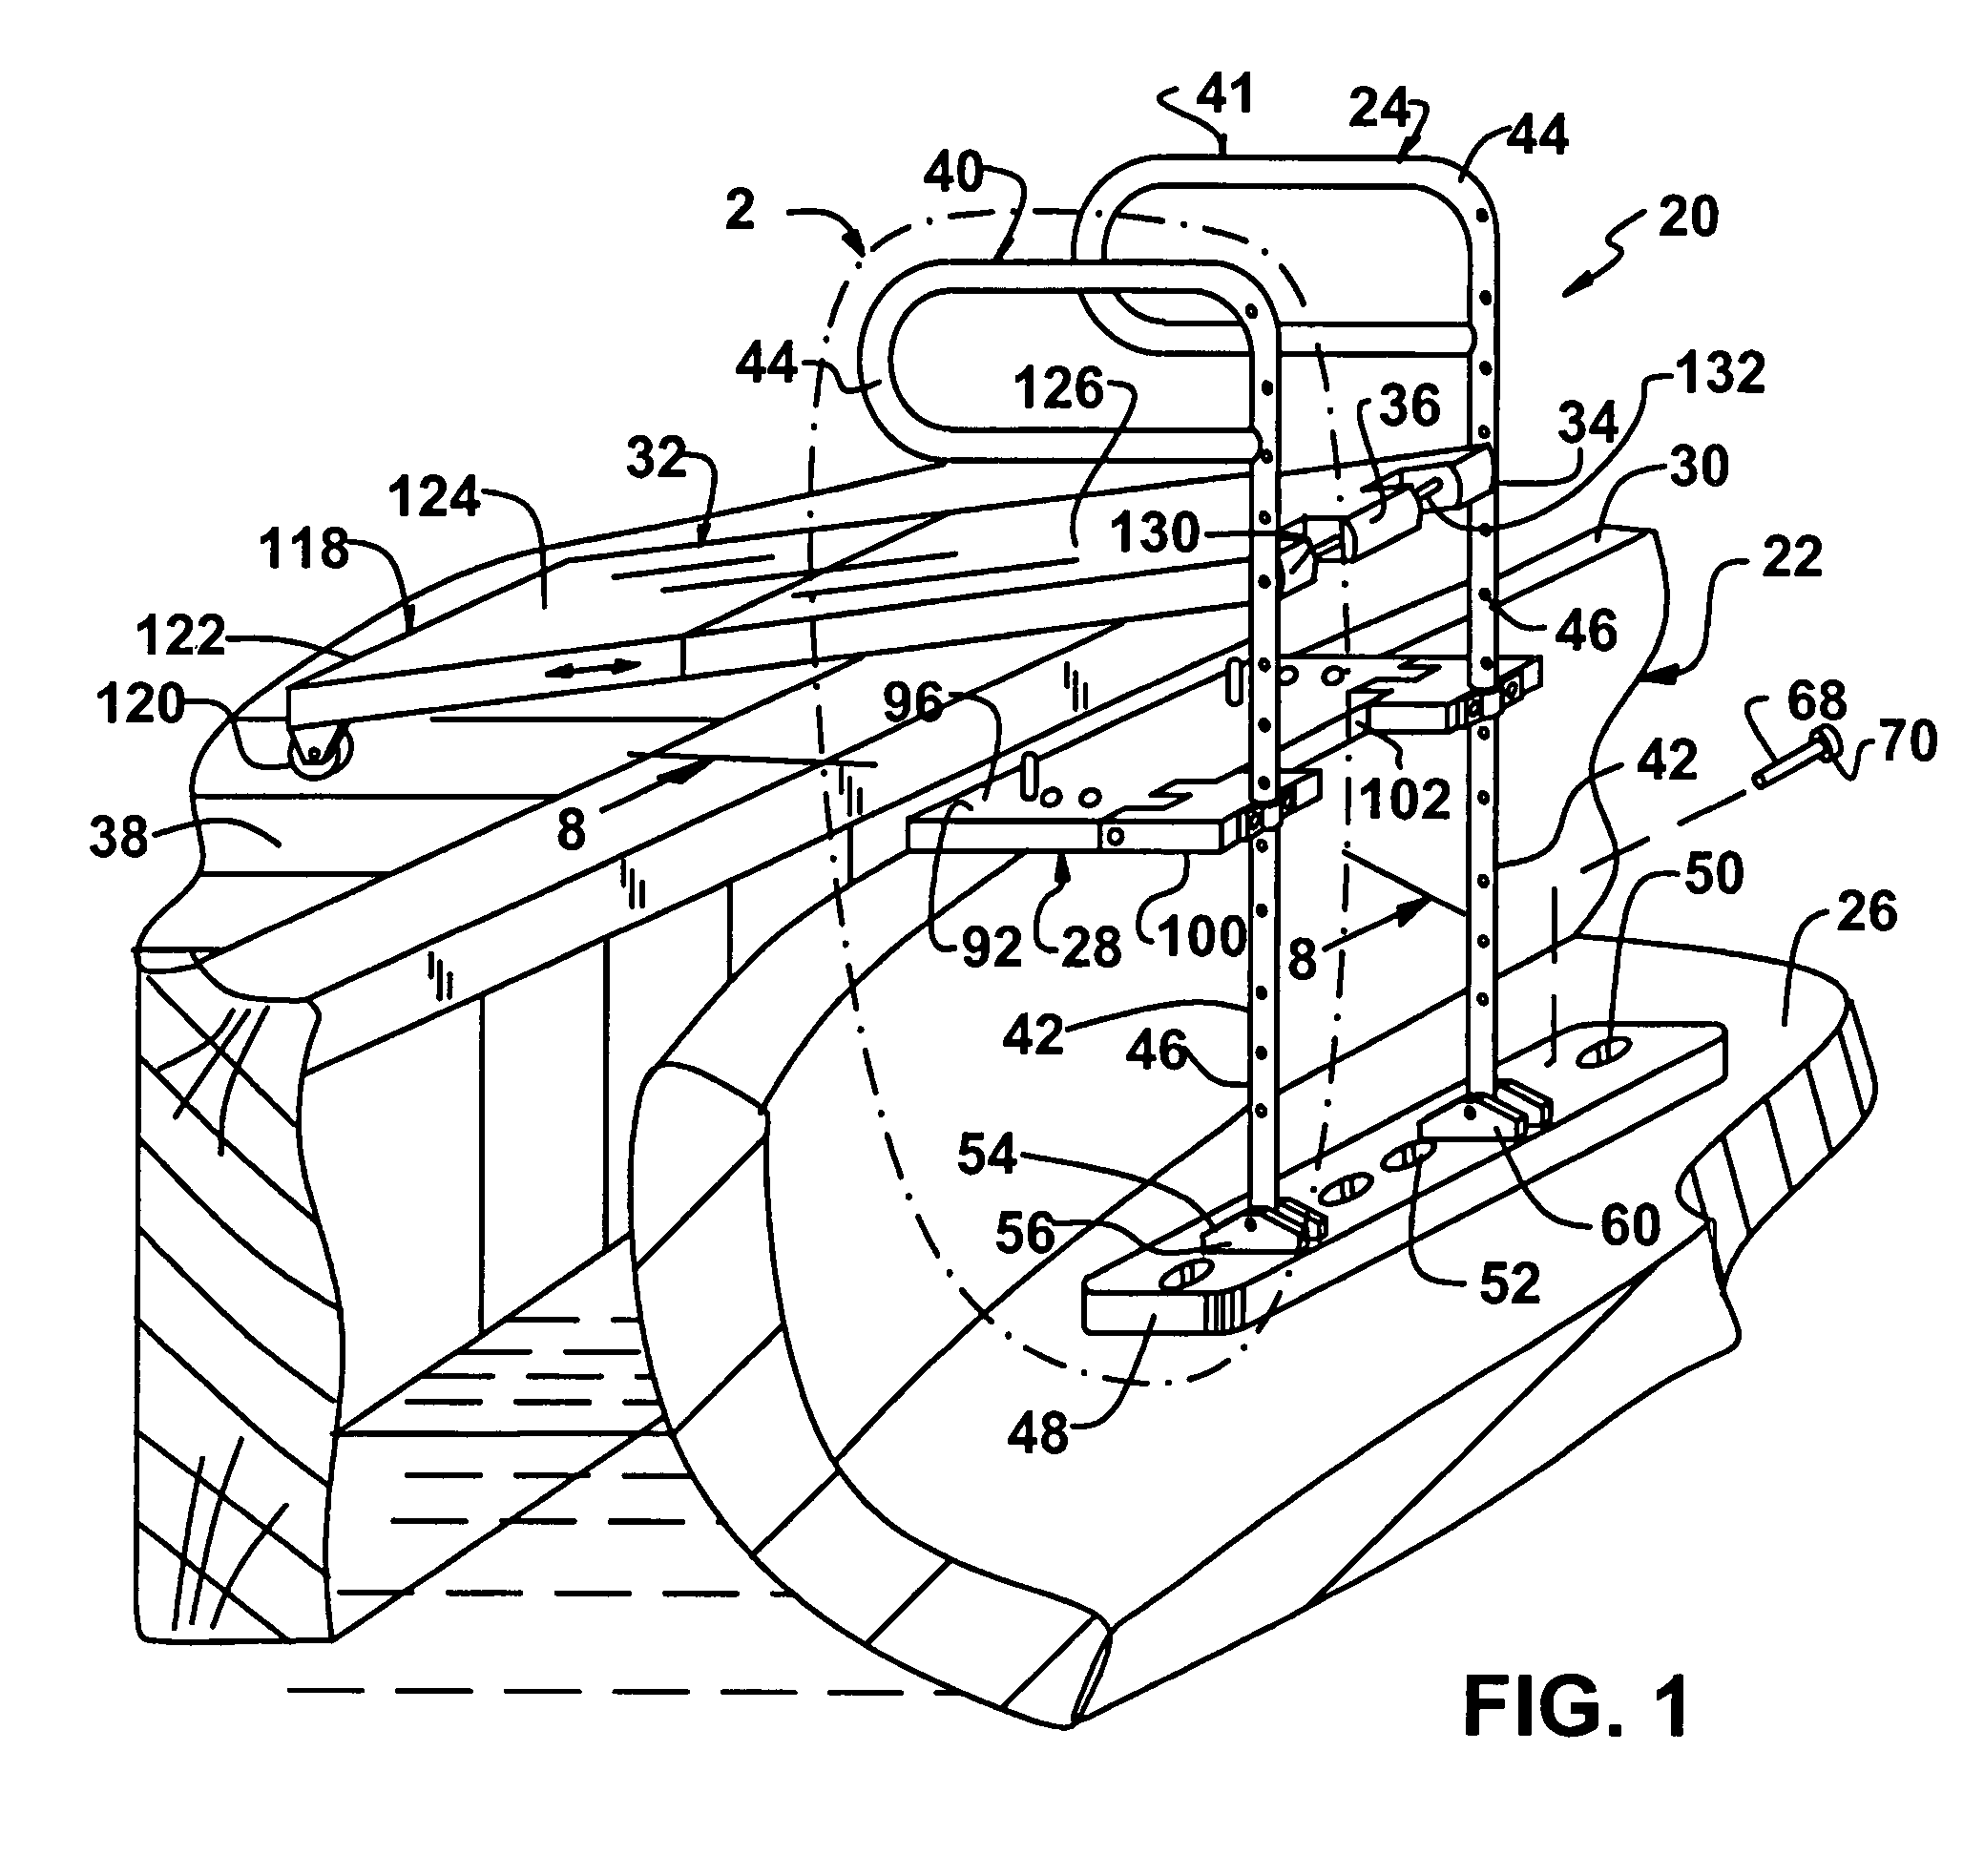 Gangplank system for facilitating safe boarding and disembarking from a boat